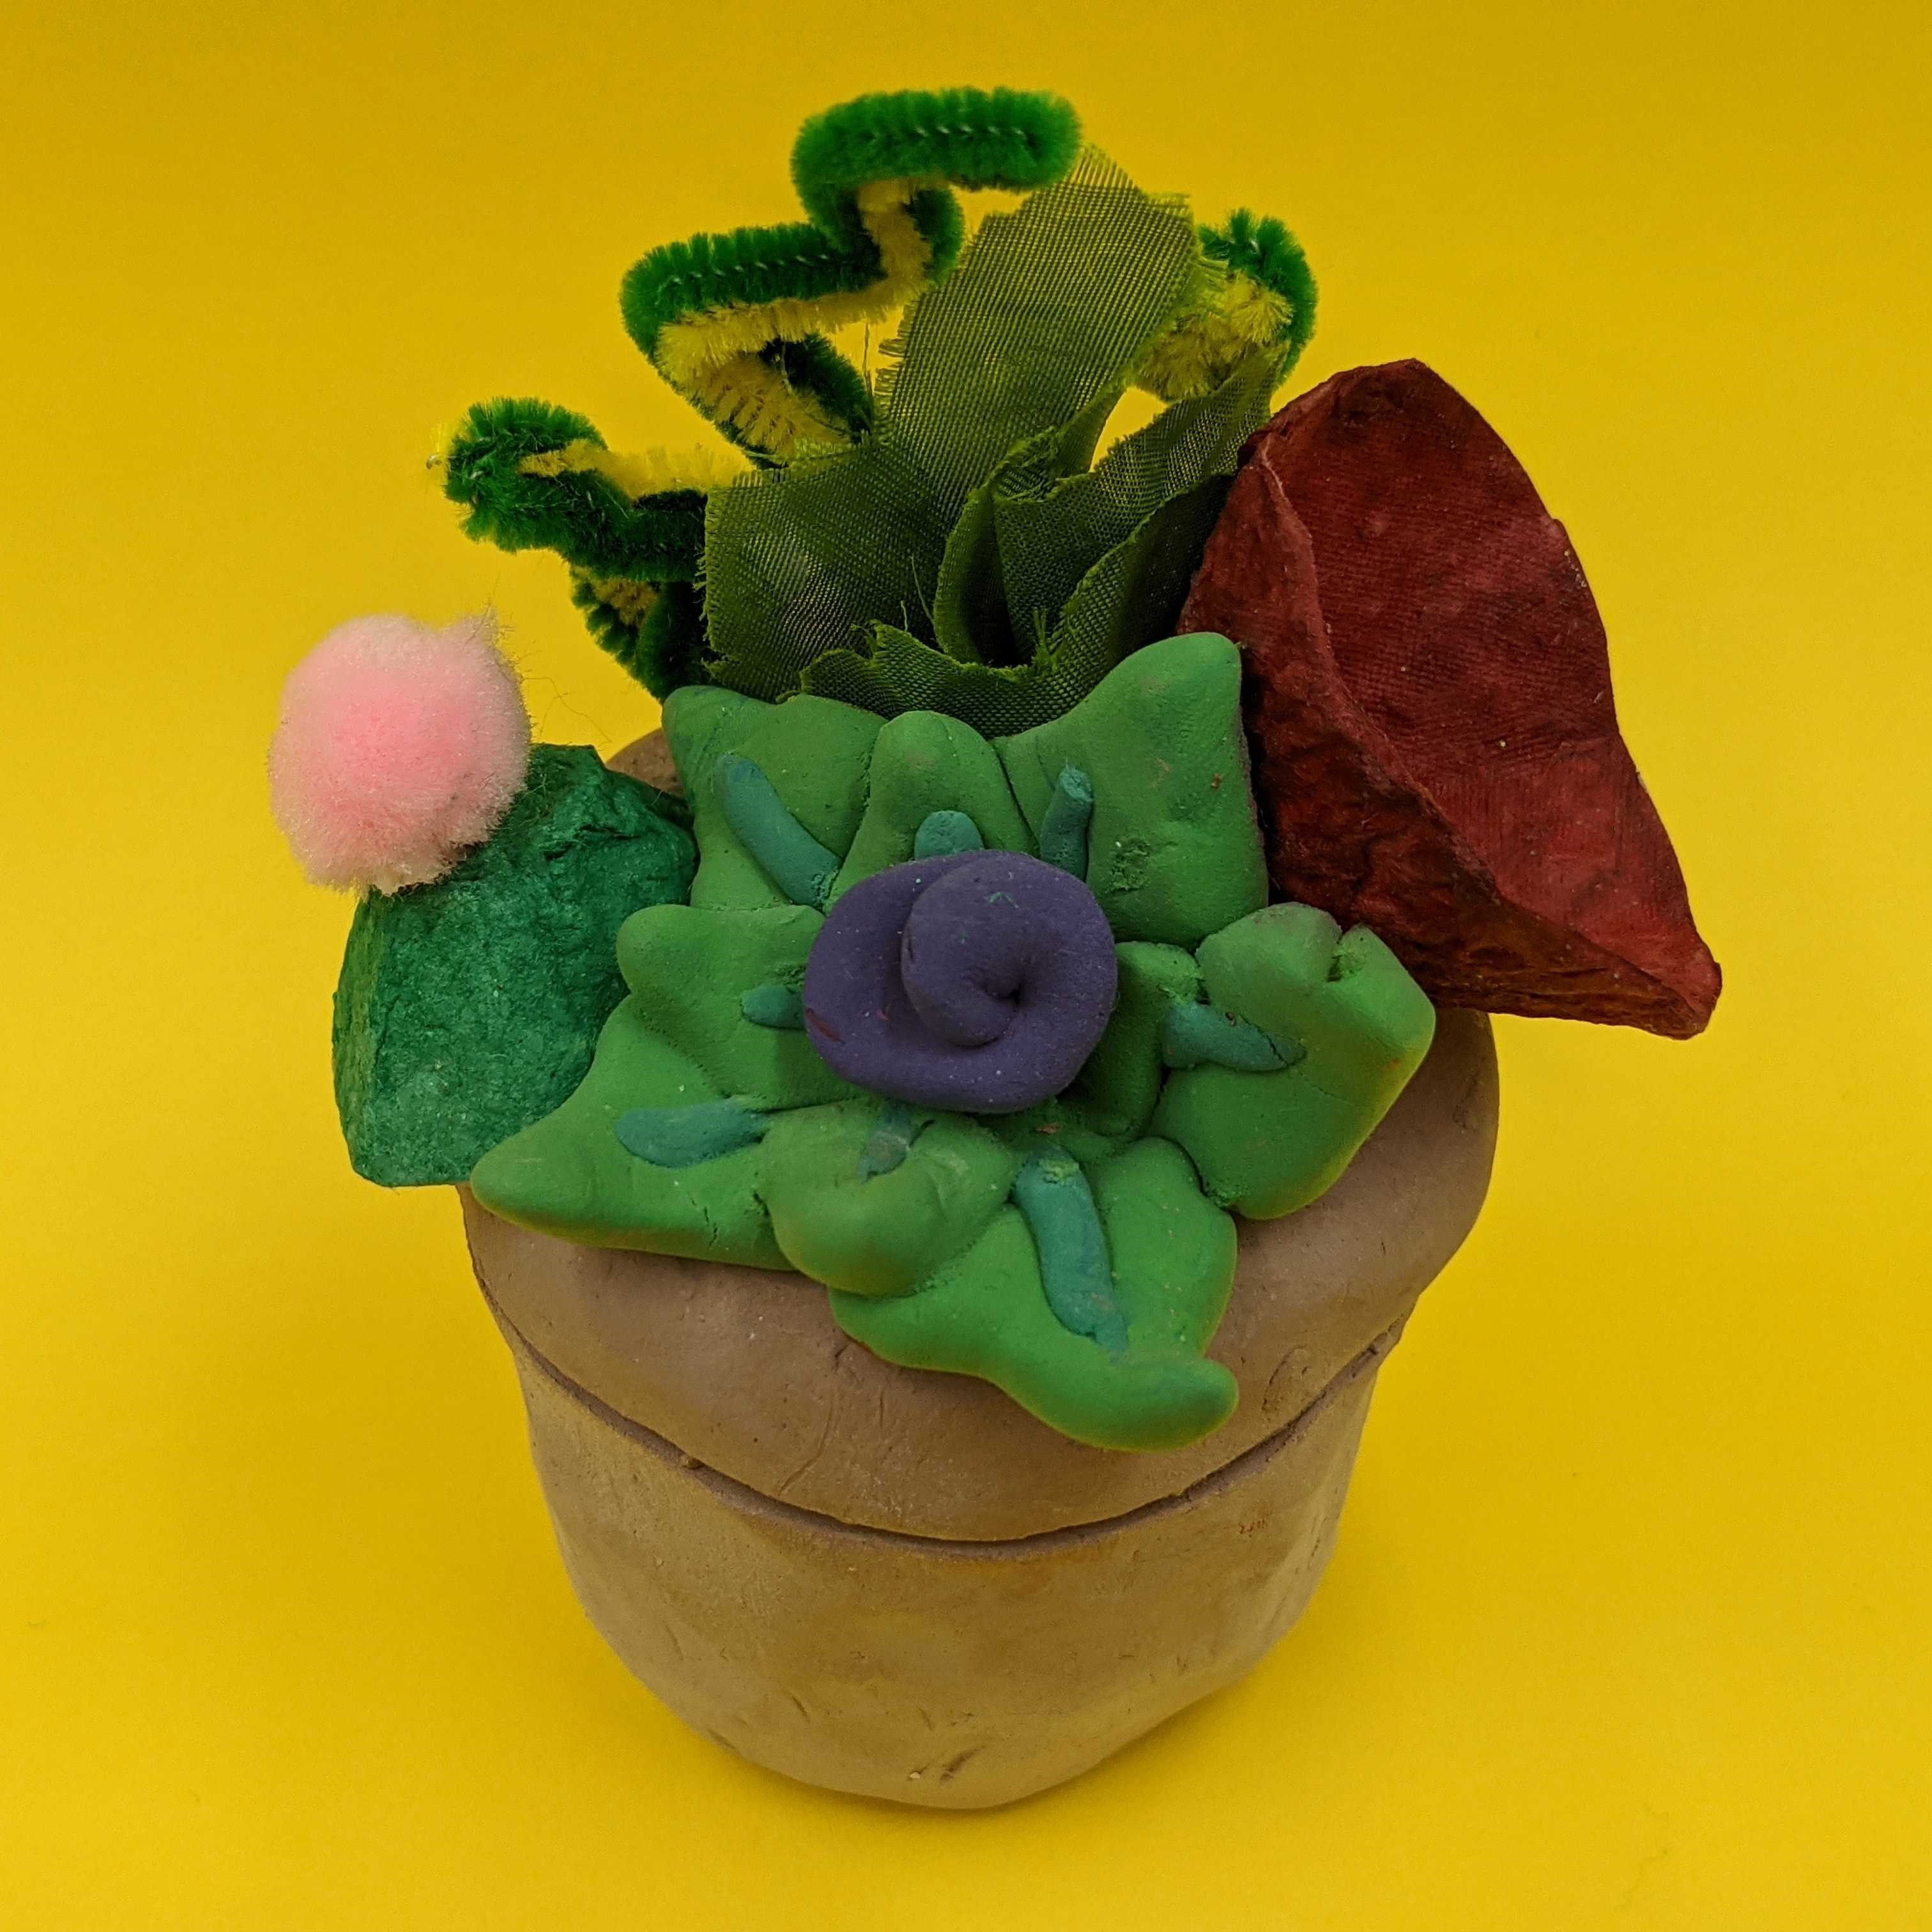 Kidcreate Studio - Chicago Lakeview, Succulent Art Project